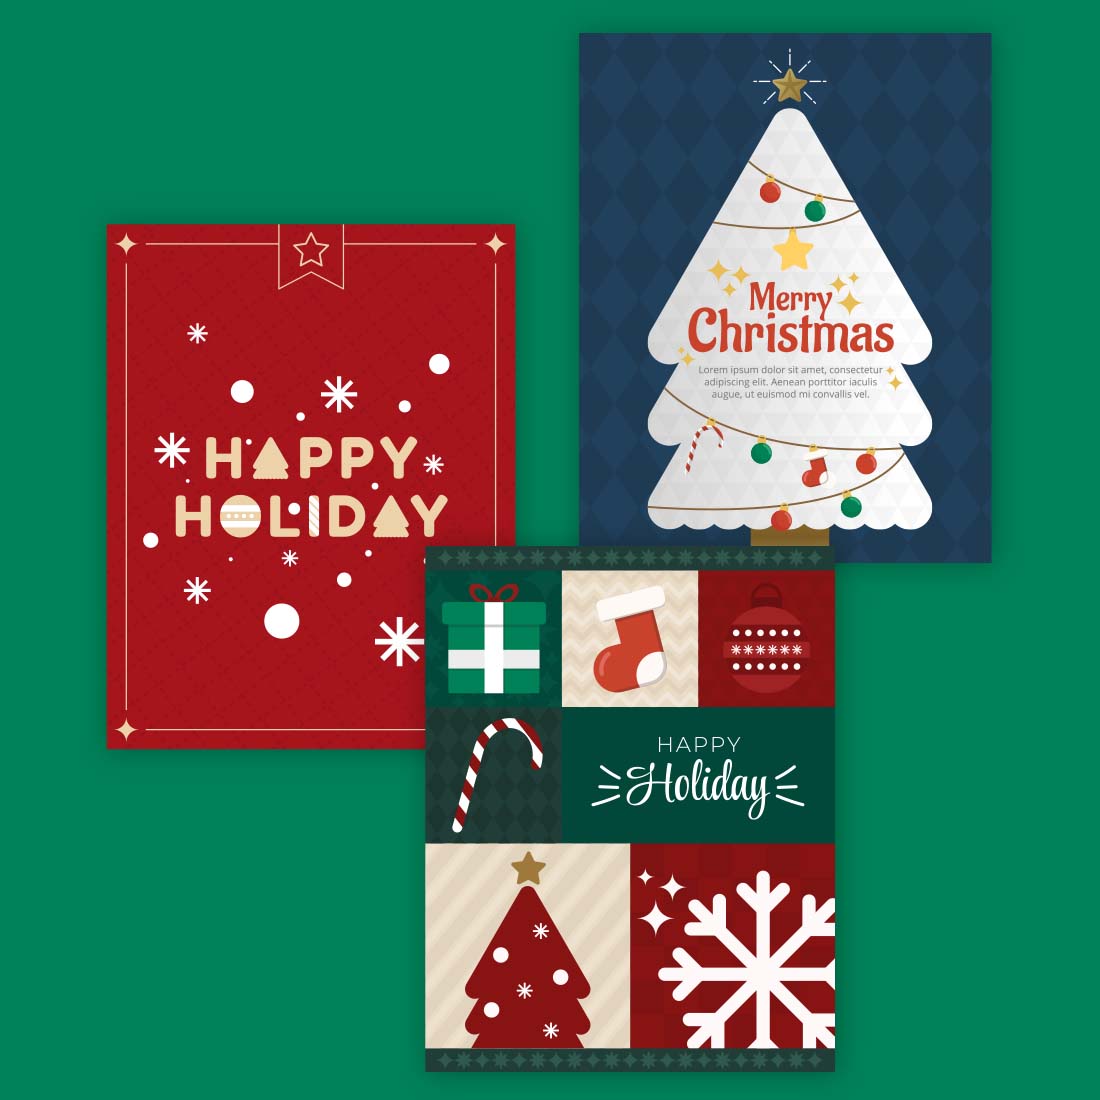 Christmas Modern Greeting Cards Vector Design cover image.